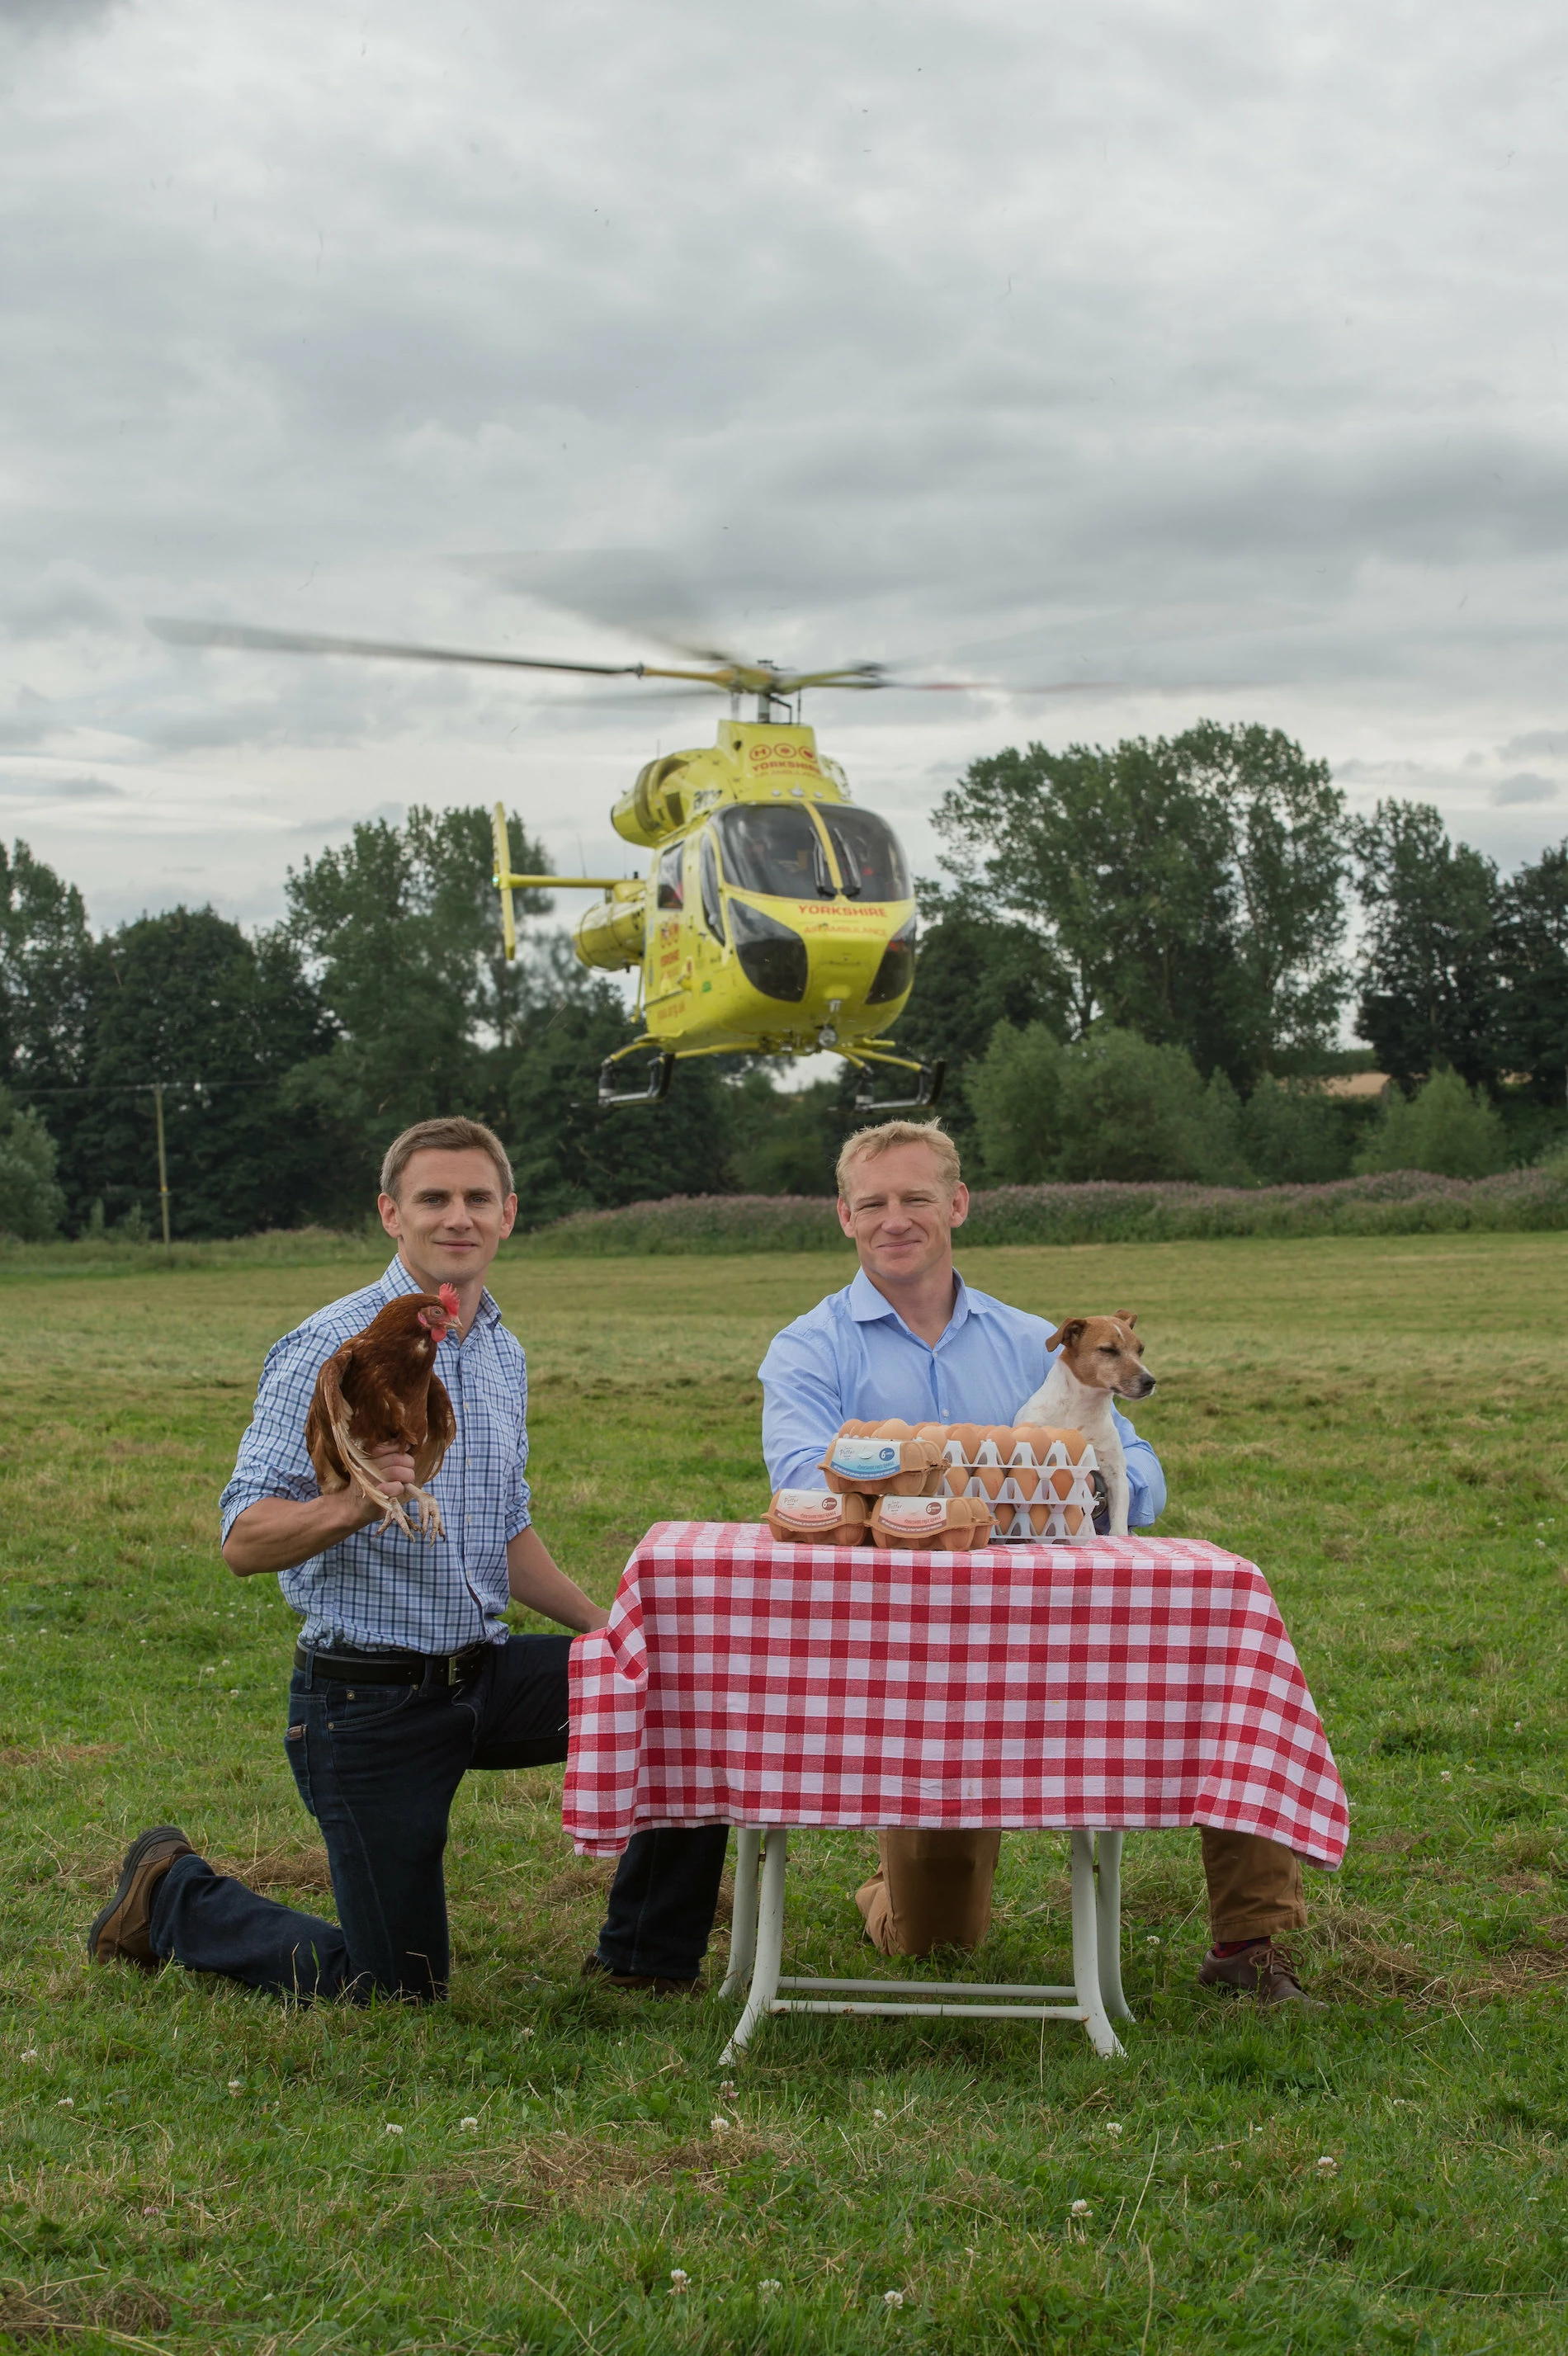 Adrian Potter and James Potter of the Yorkshire Farmhouse Eggs Limited, trading as James Potter.